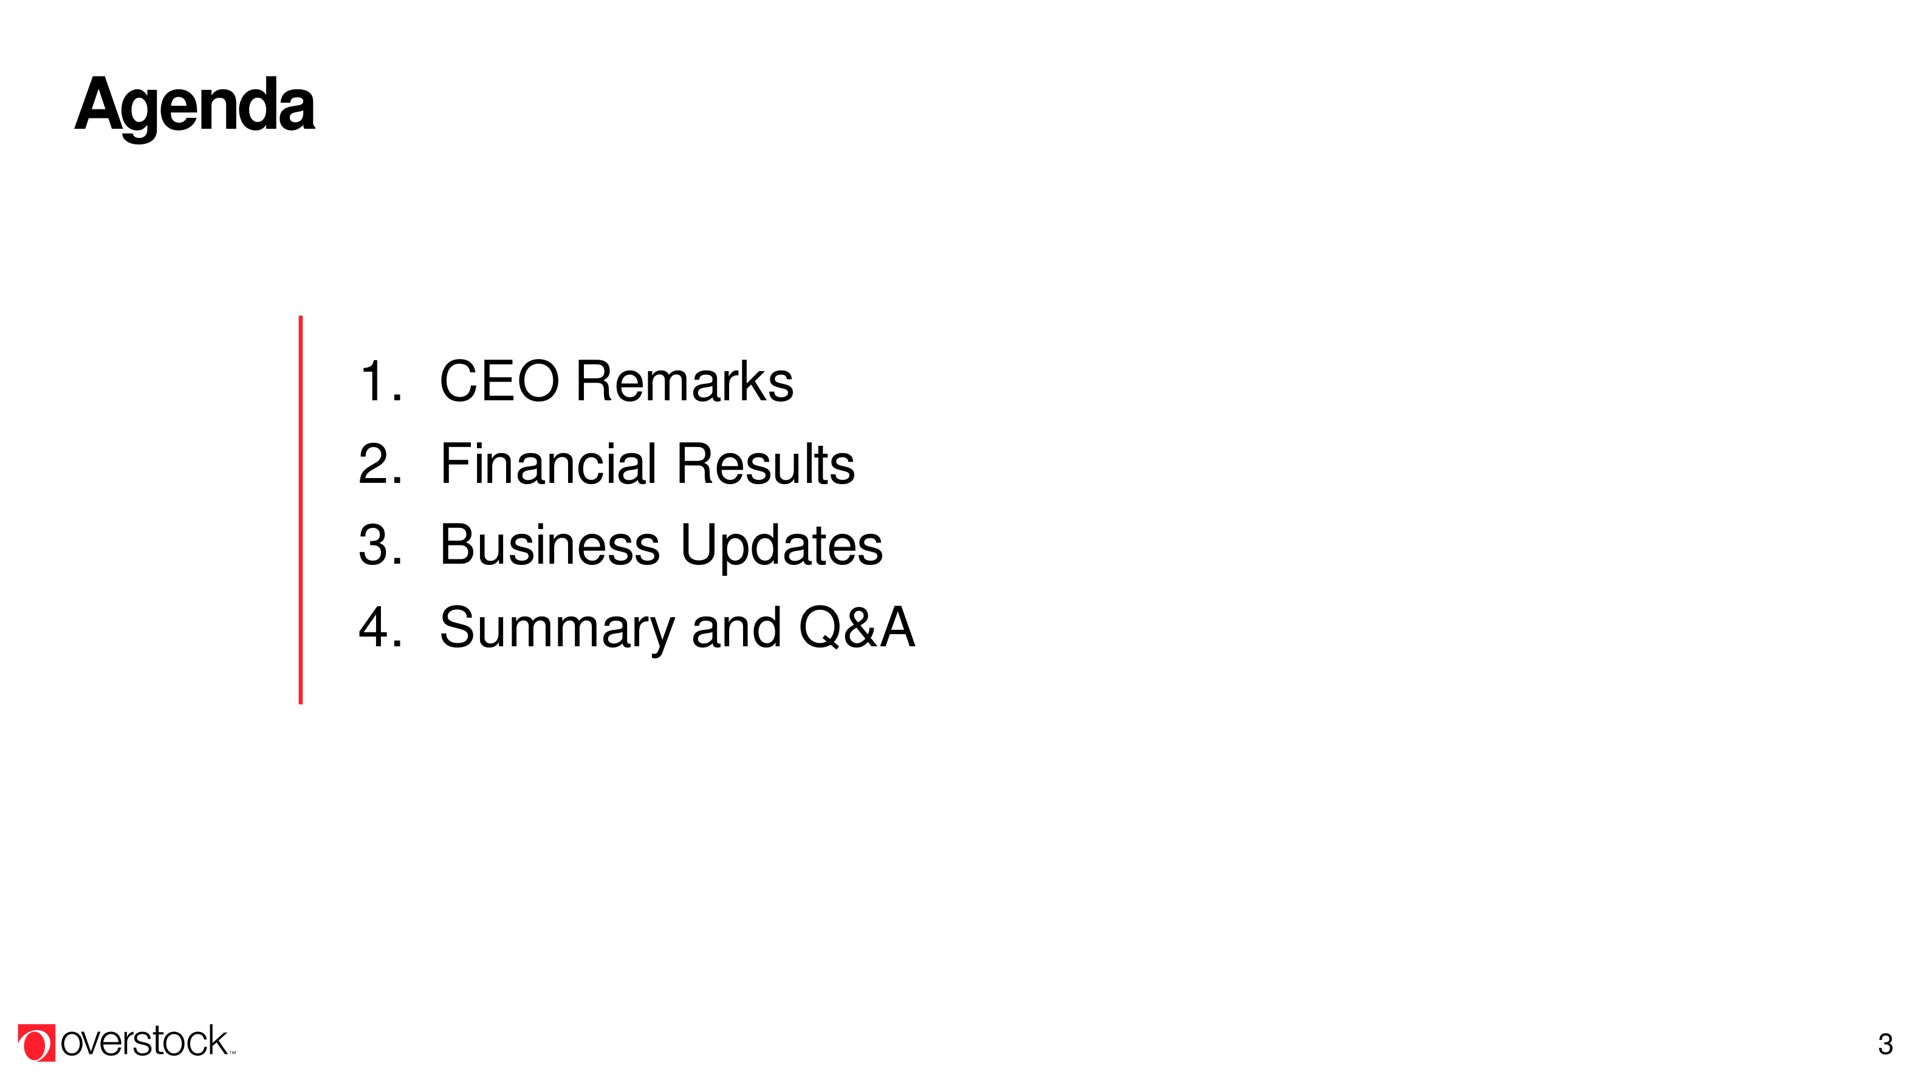 agenda financial results business updates summary and a | Overstock